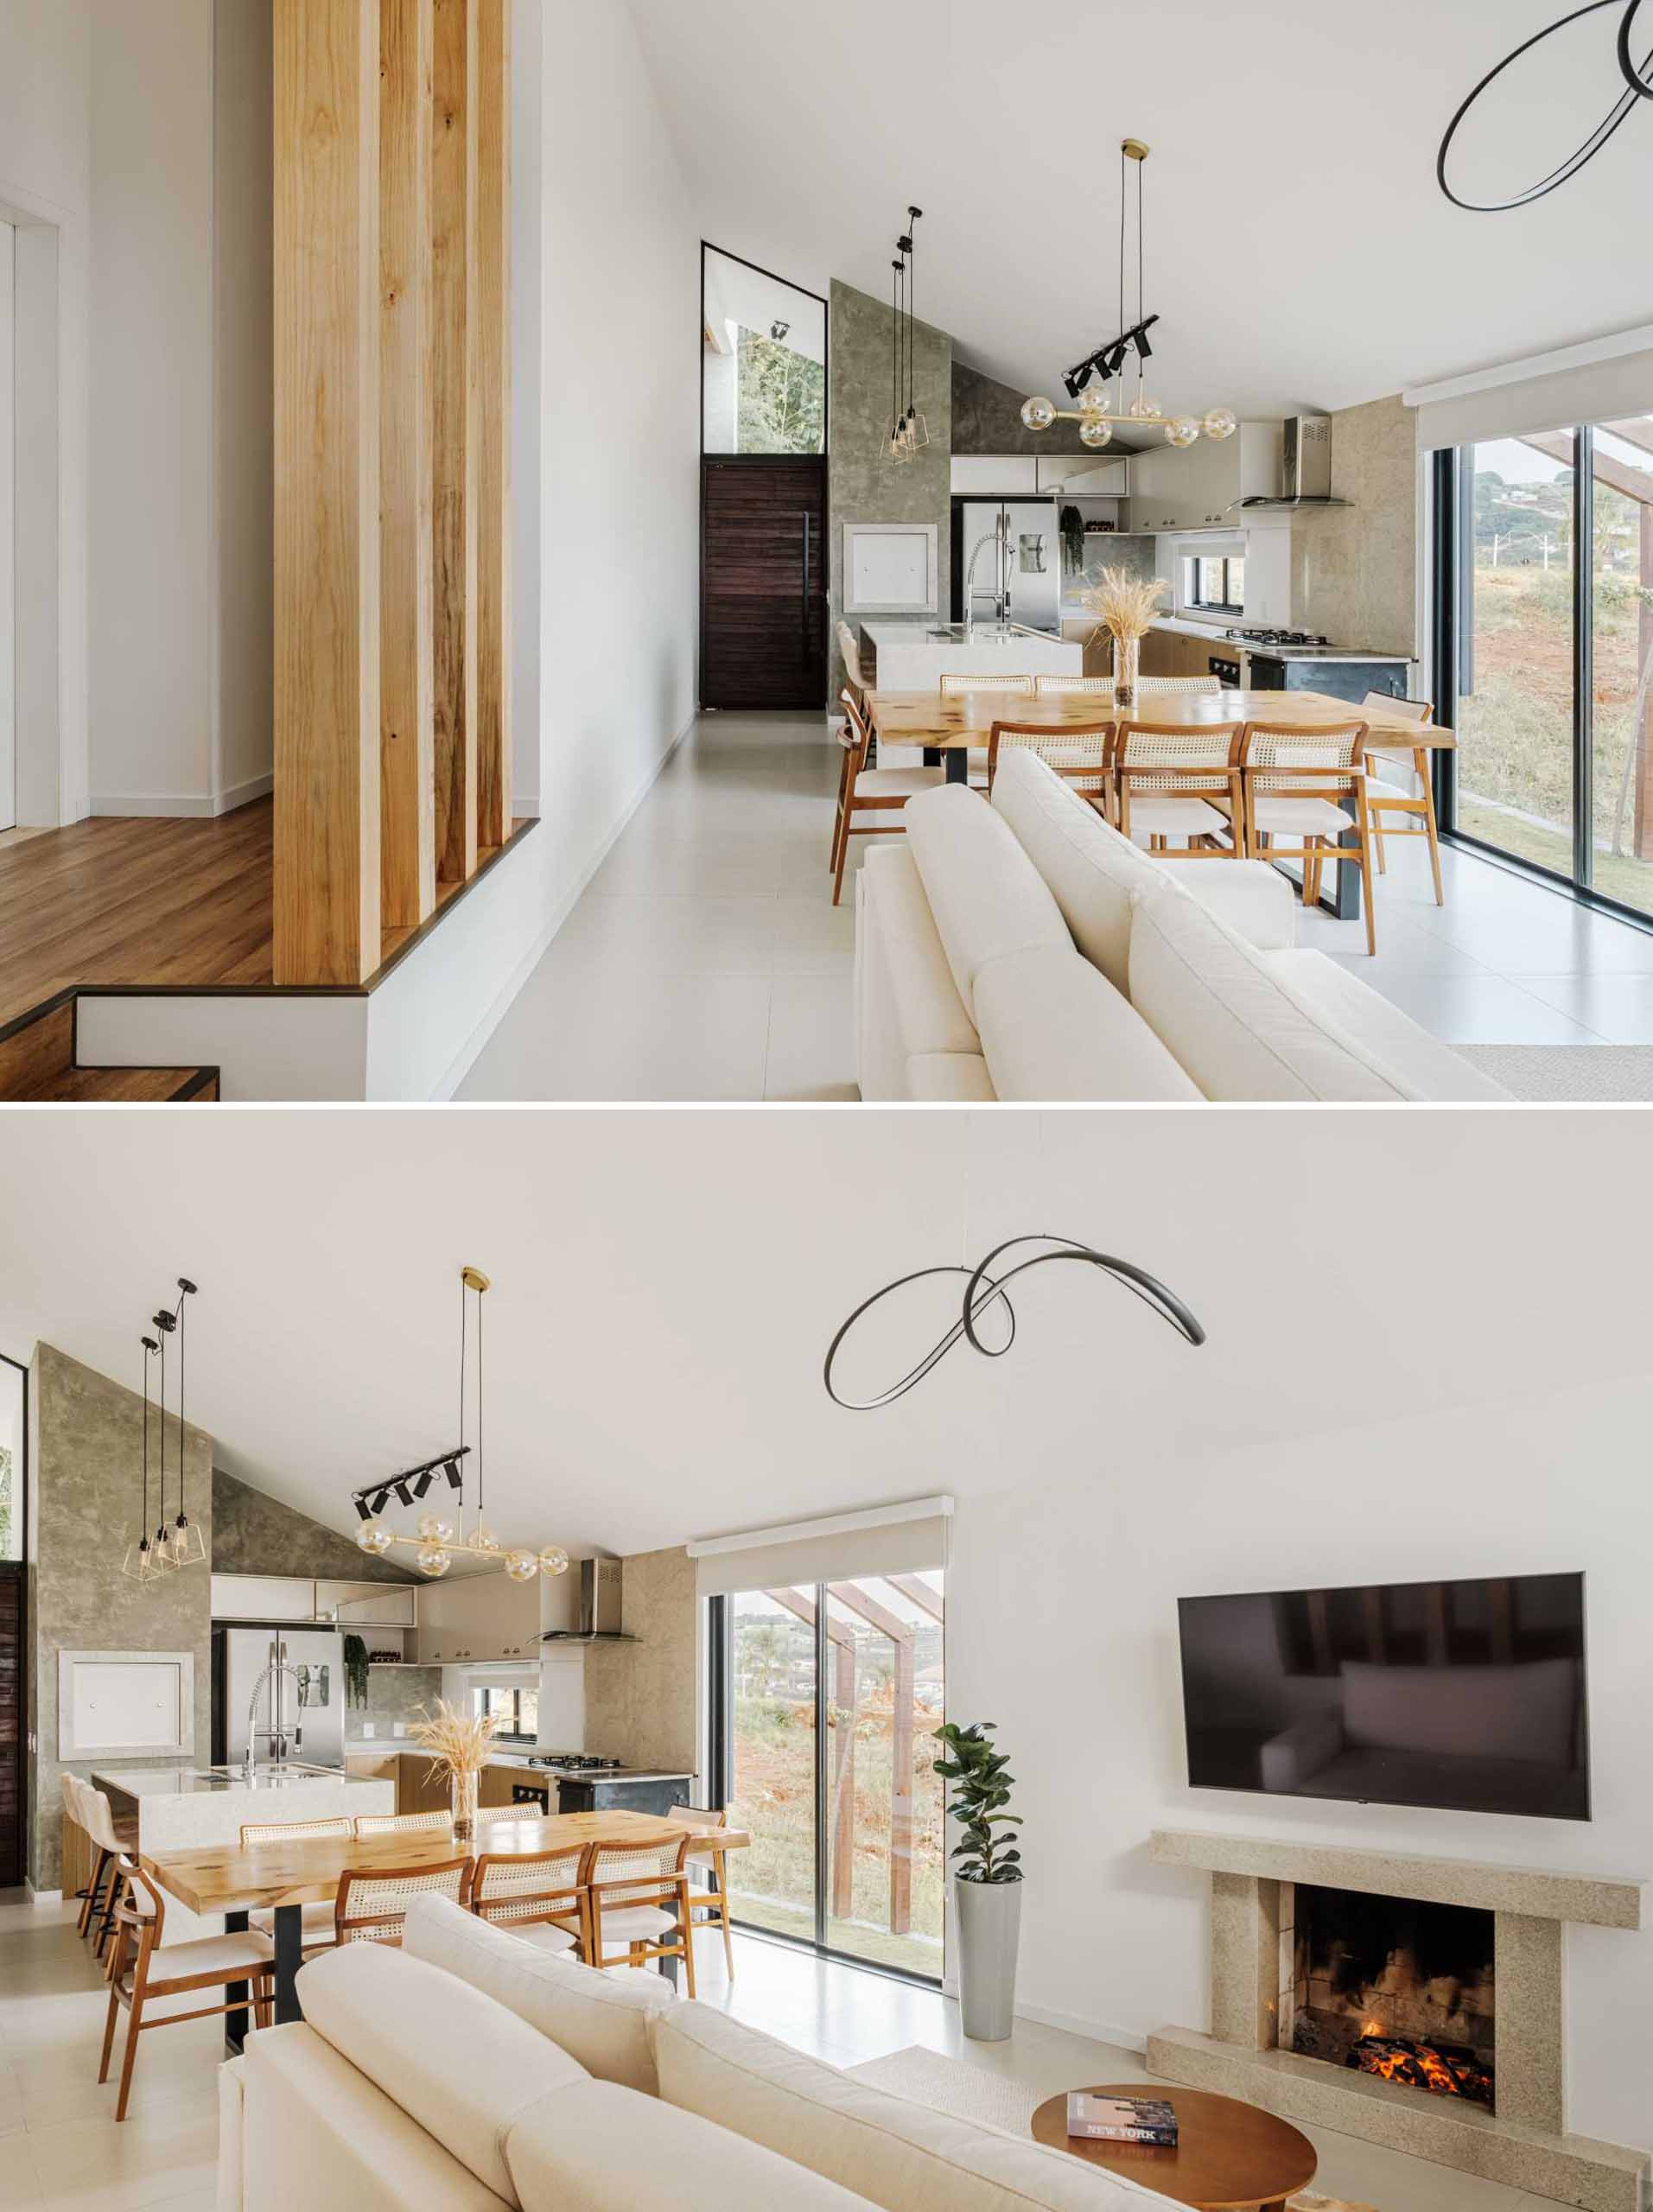 The palette of materials chosen in this modern open-plan interior, unites wood, linen, and burnt cement, which are all enhanced by the white walls and ceiling.